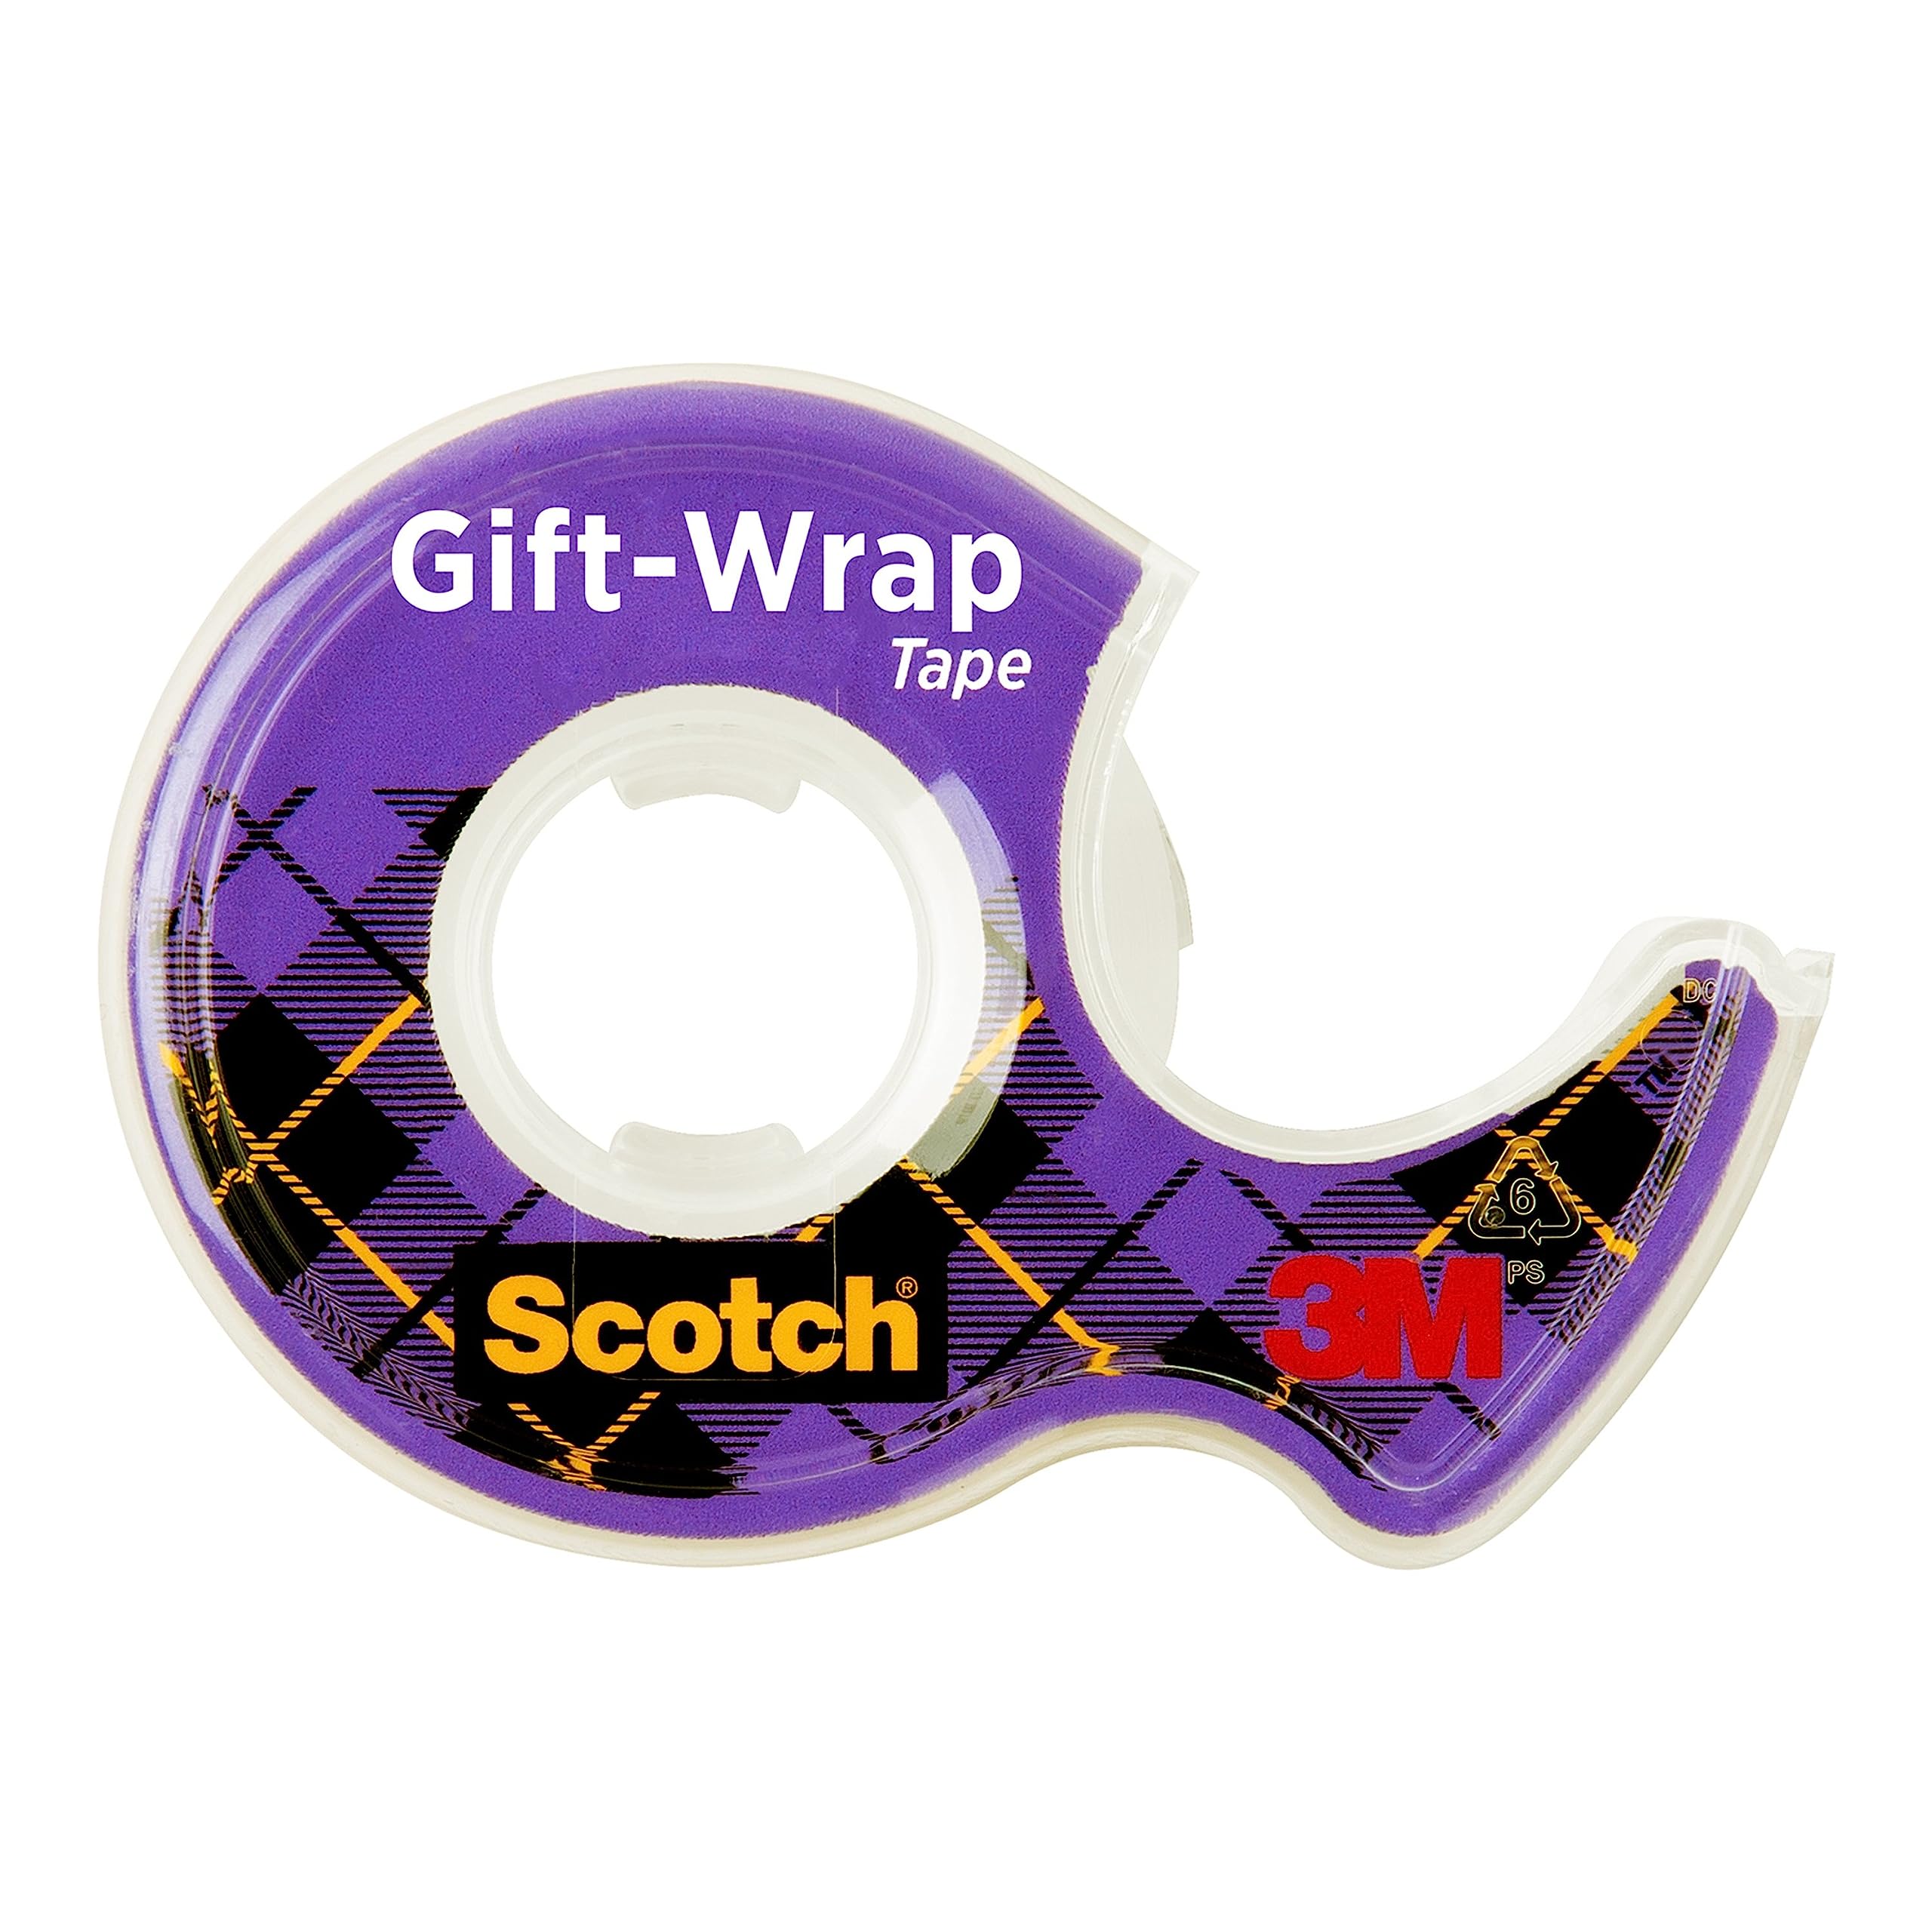 Scotch Gift-Wrap Tape, 3/4 in x 650 in, 6 Dispensers/Pack